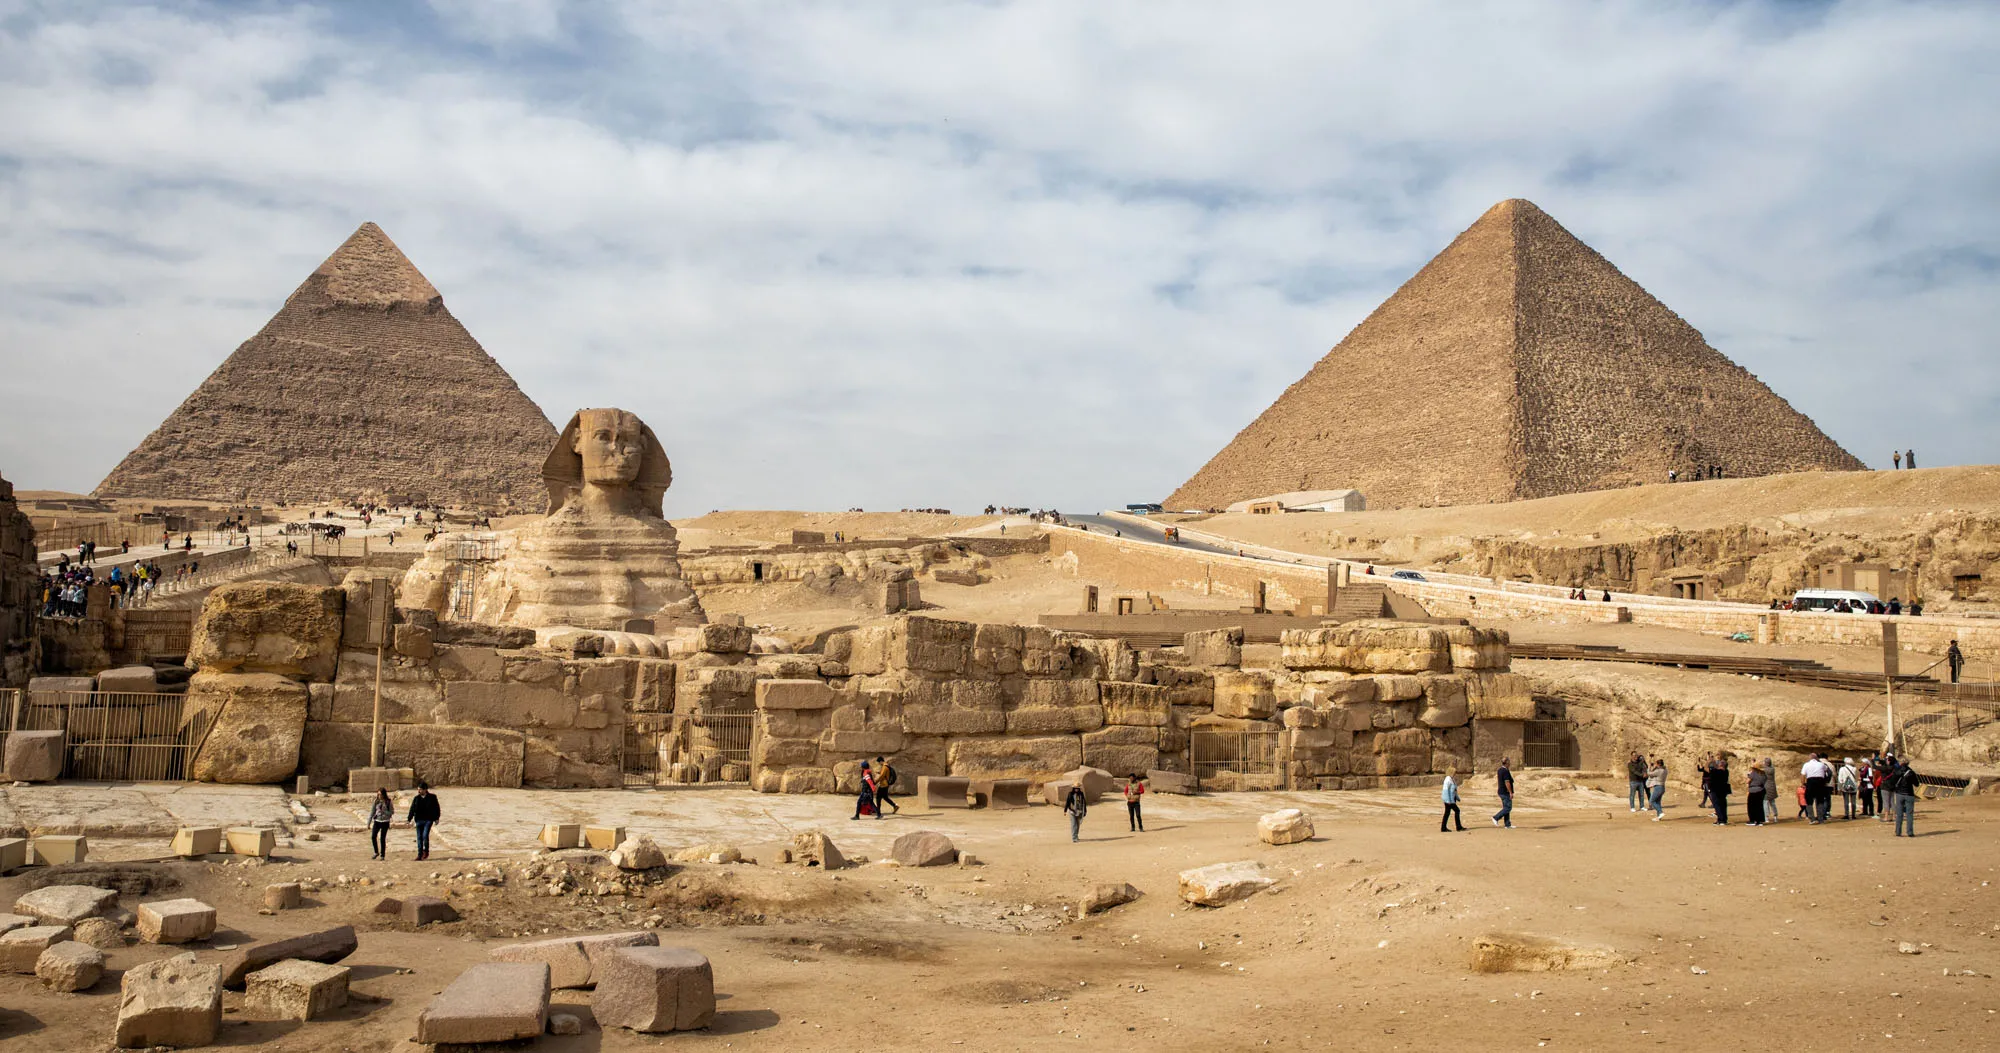 Featured image for “Pyramids of Giza: The Complete Guide for First-Time Visitors”